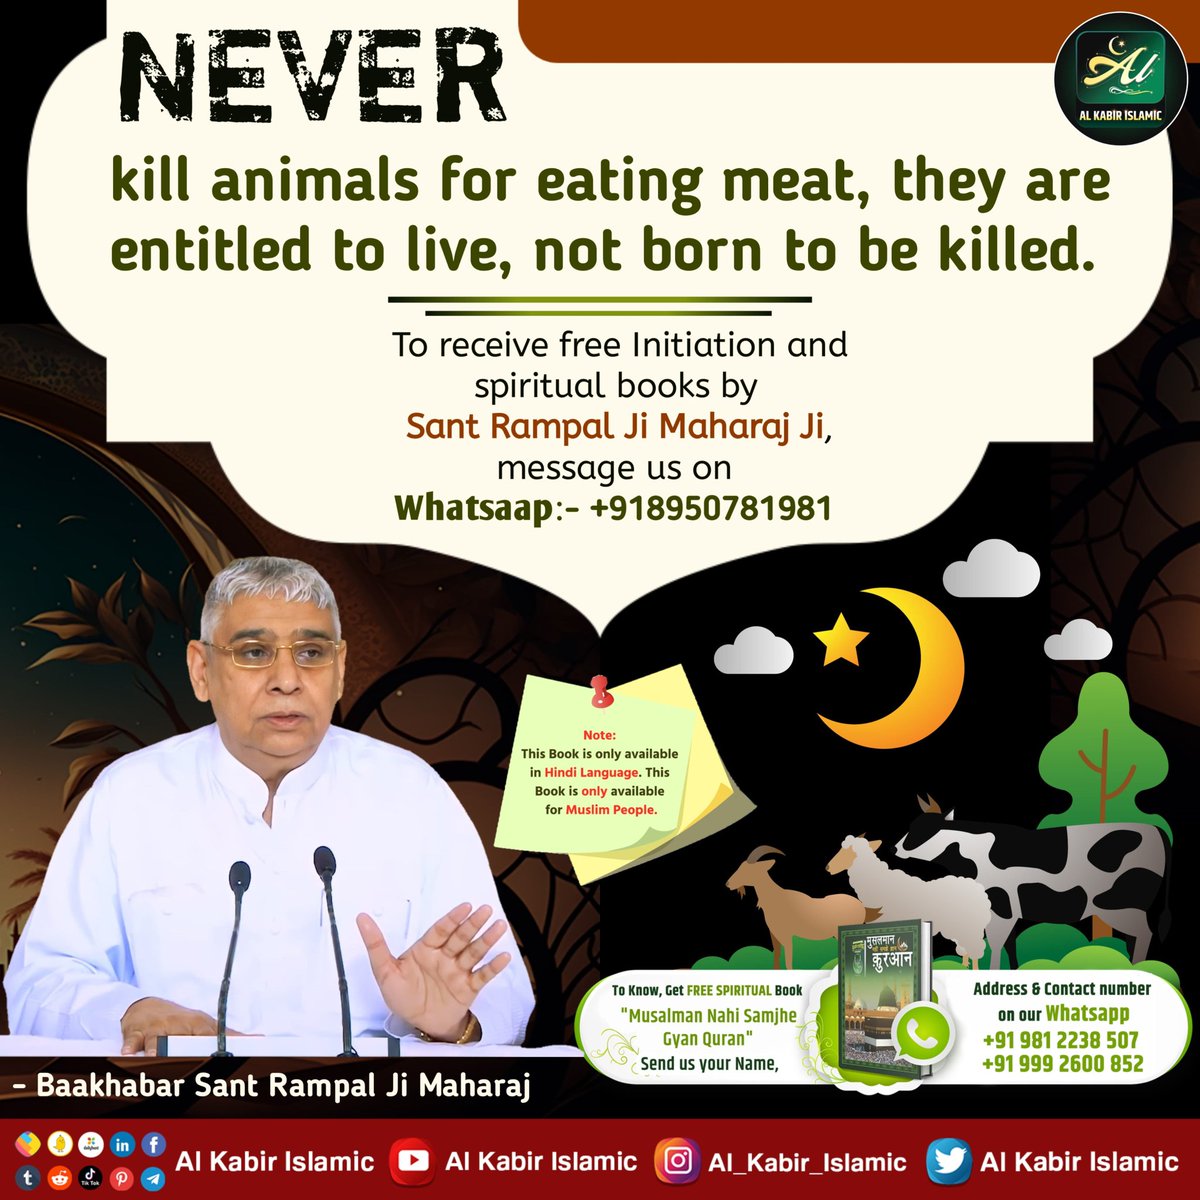 #RealKnowledgeOfIslam
Never kill animals for eating meat, they are entitled to live, not born to be killed!
Baakhabar Sant Rampal Ji